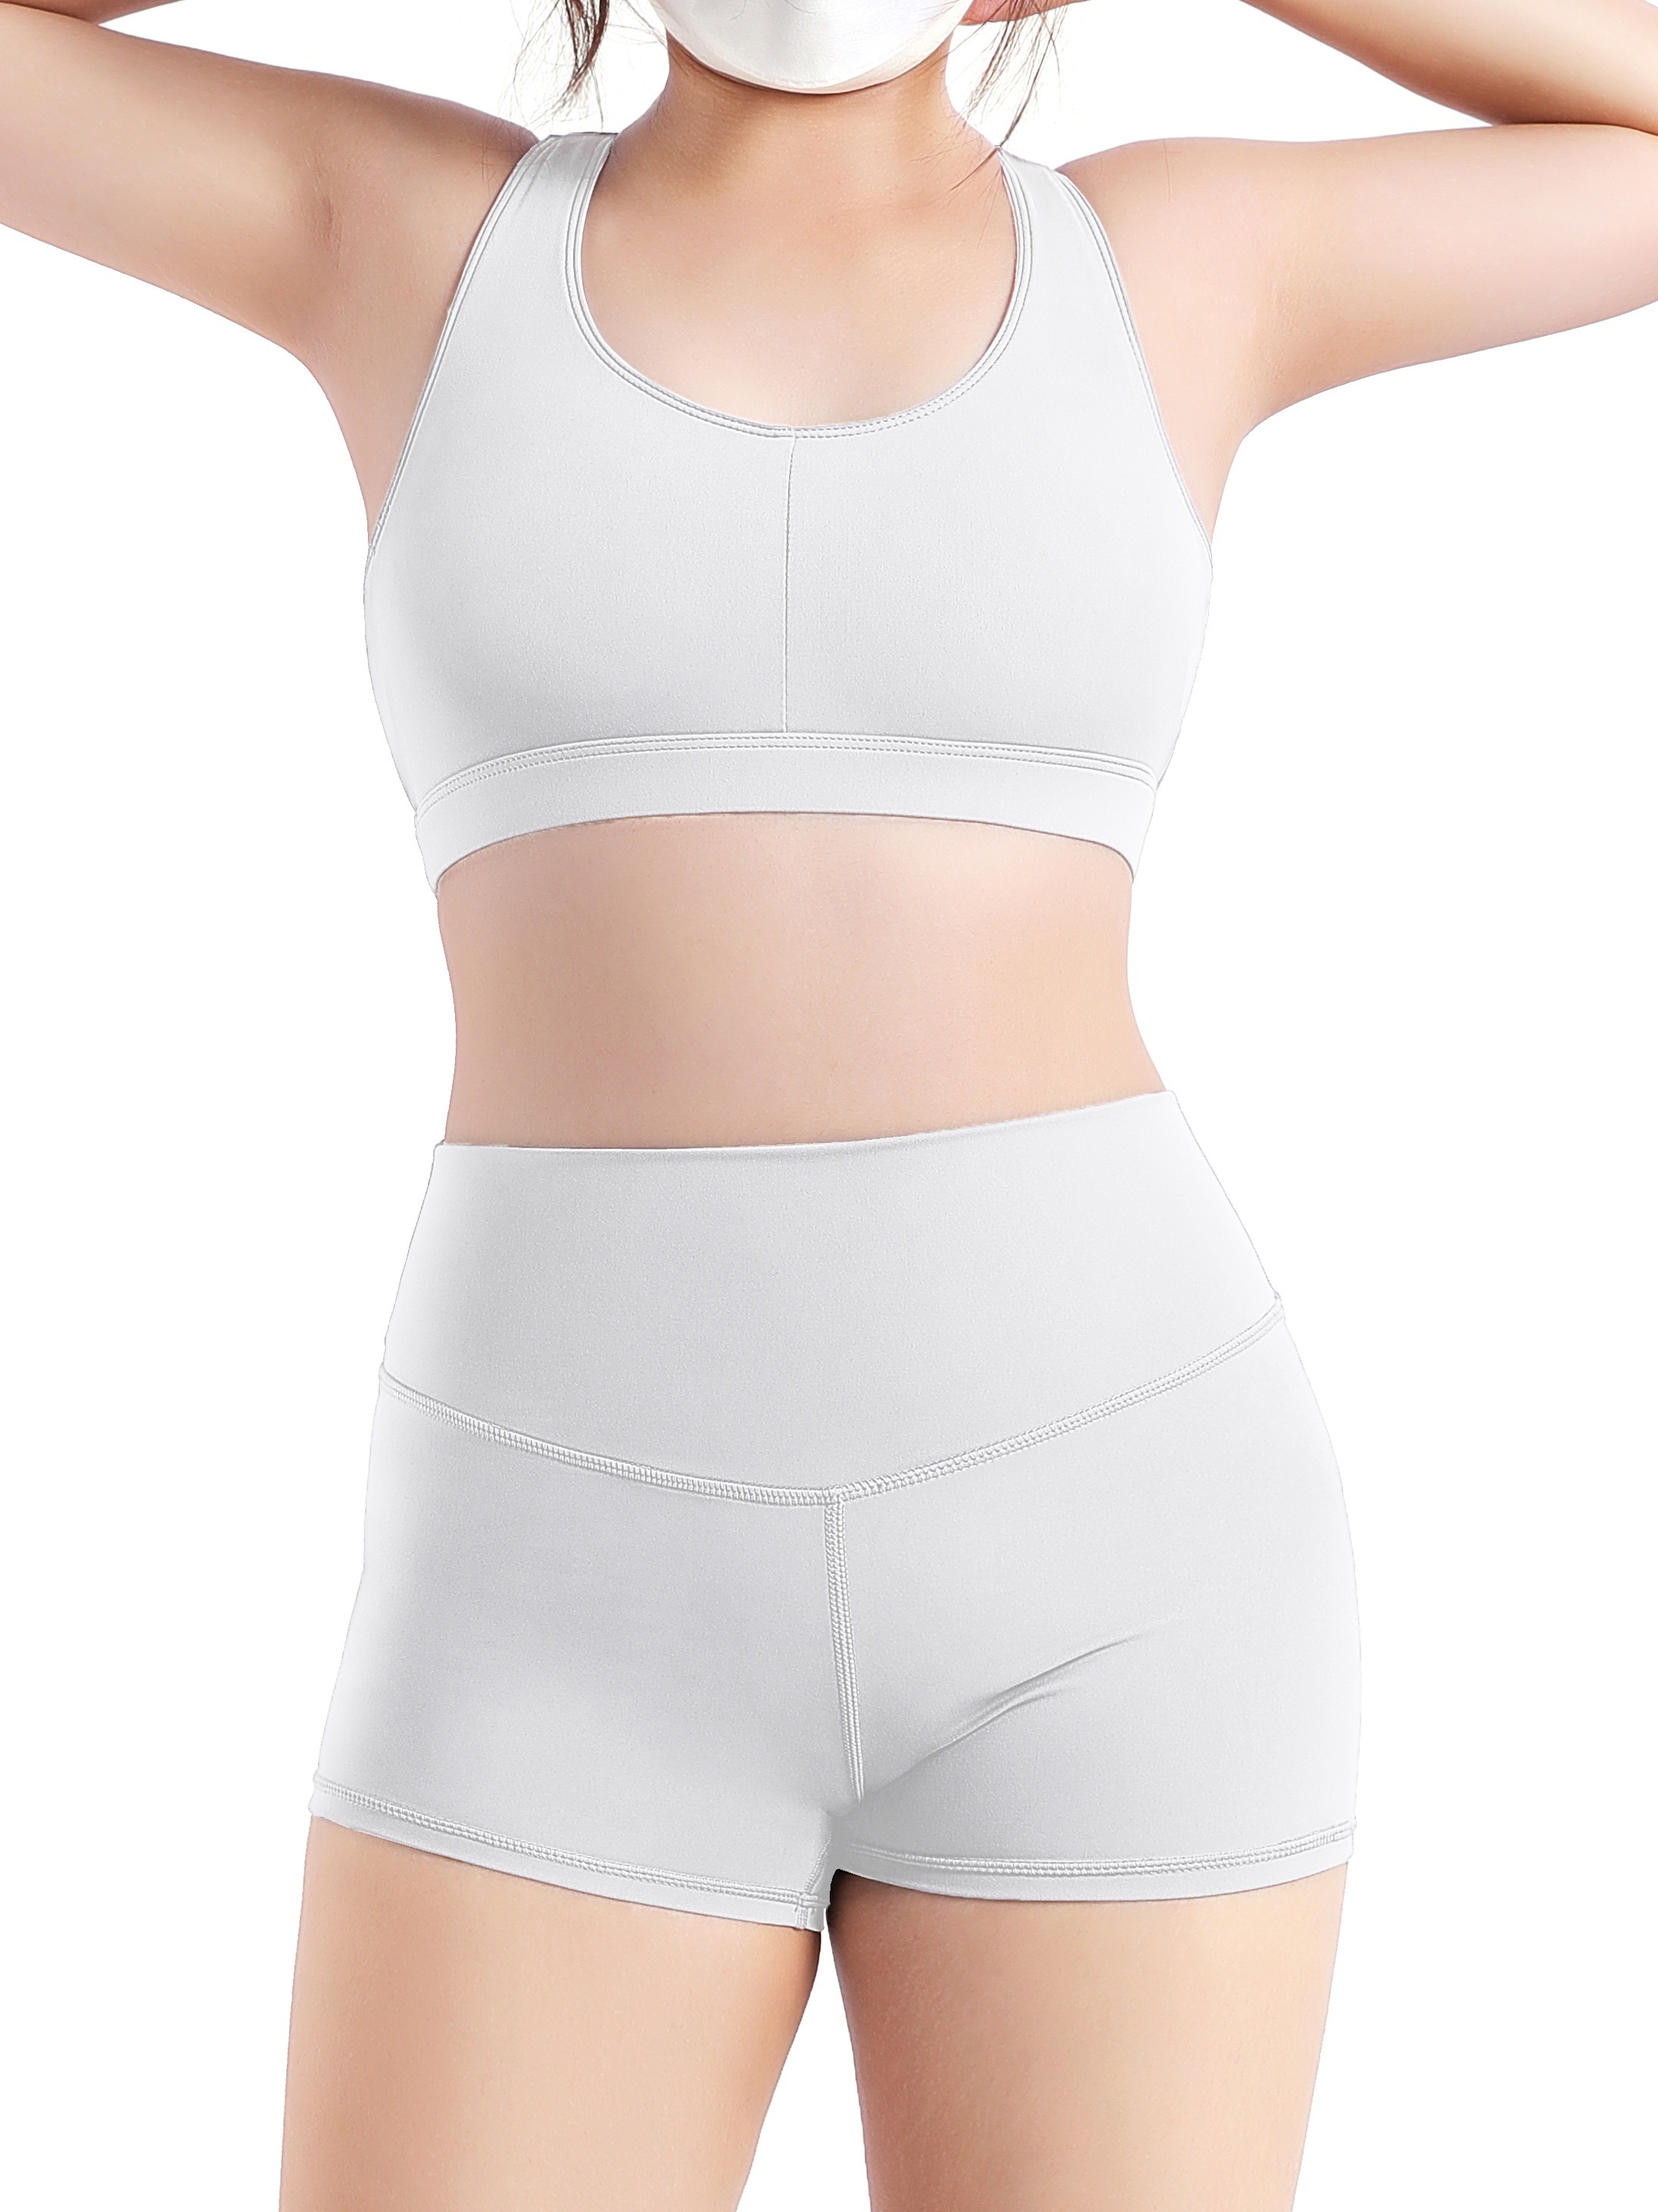 Womens White High Waist Short Yoga Set With Crop Top, Bra, And